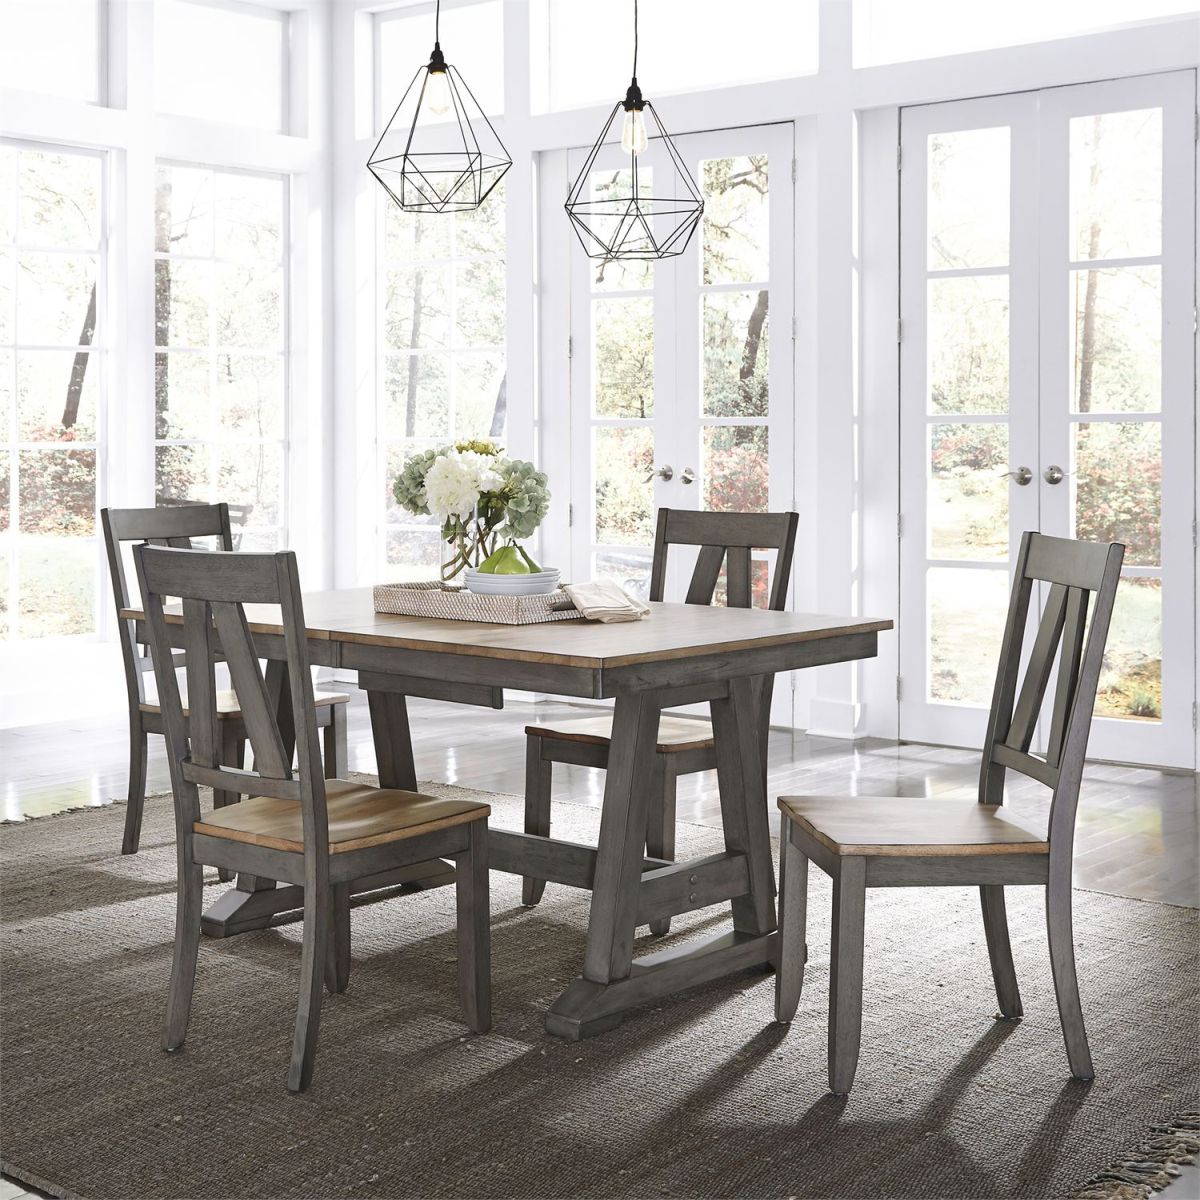 Liberty Furniture Lindsey Farm Gray and Sandstone 5 Piece Trestle Table Set